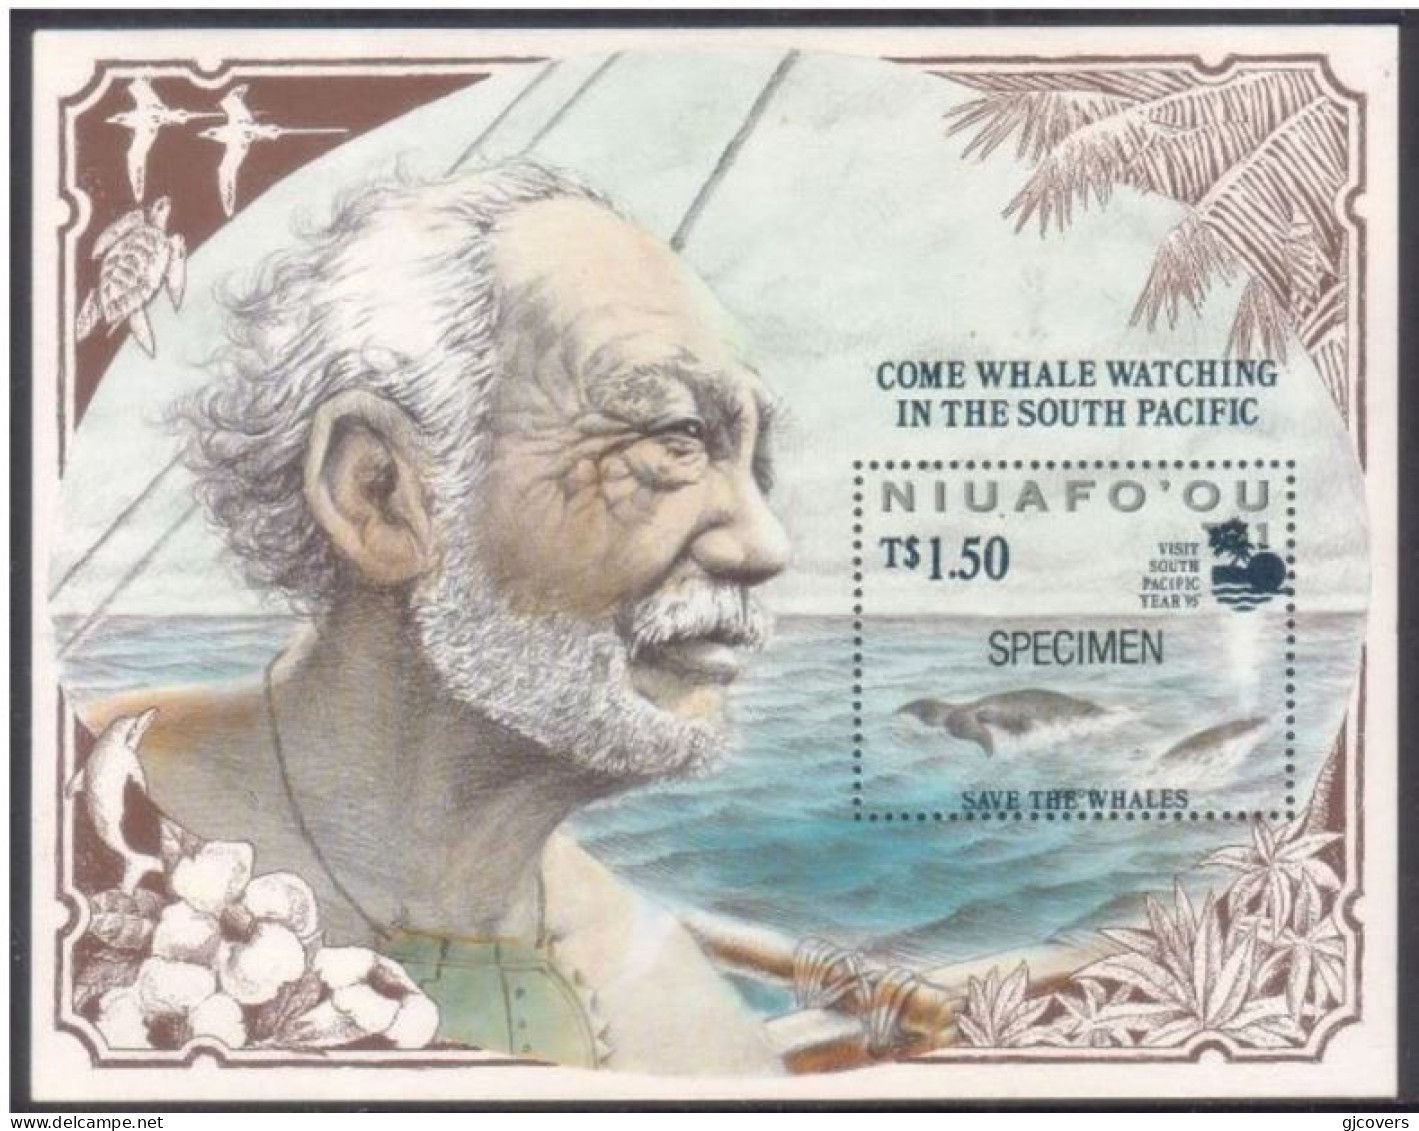 Tonga Niuafo'ou 1995 S/S  - Ovpt "Come Whale Watching" & "Save The Whales" Specimen - Balene